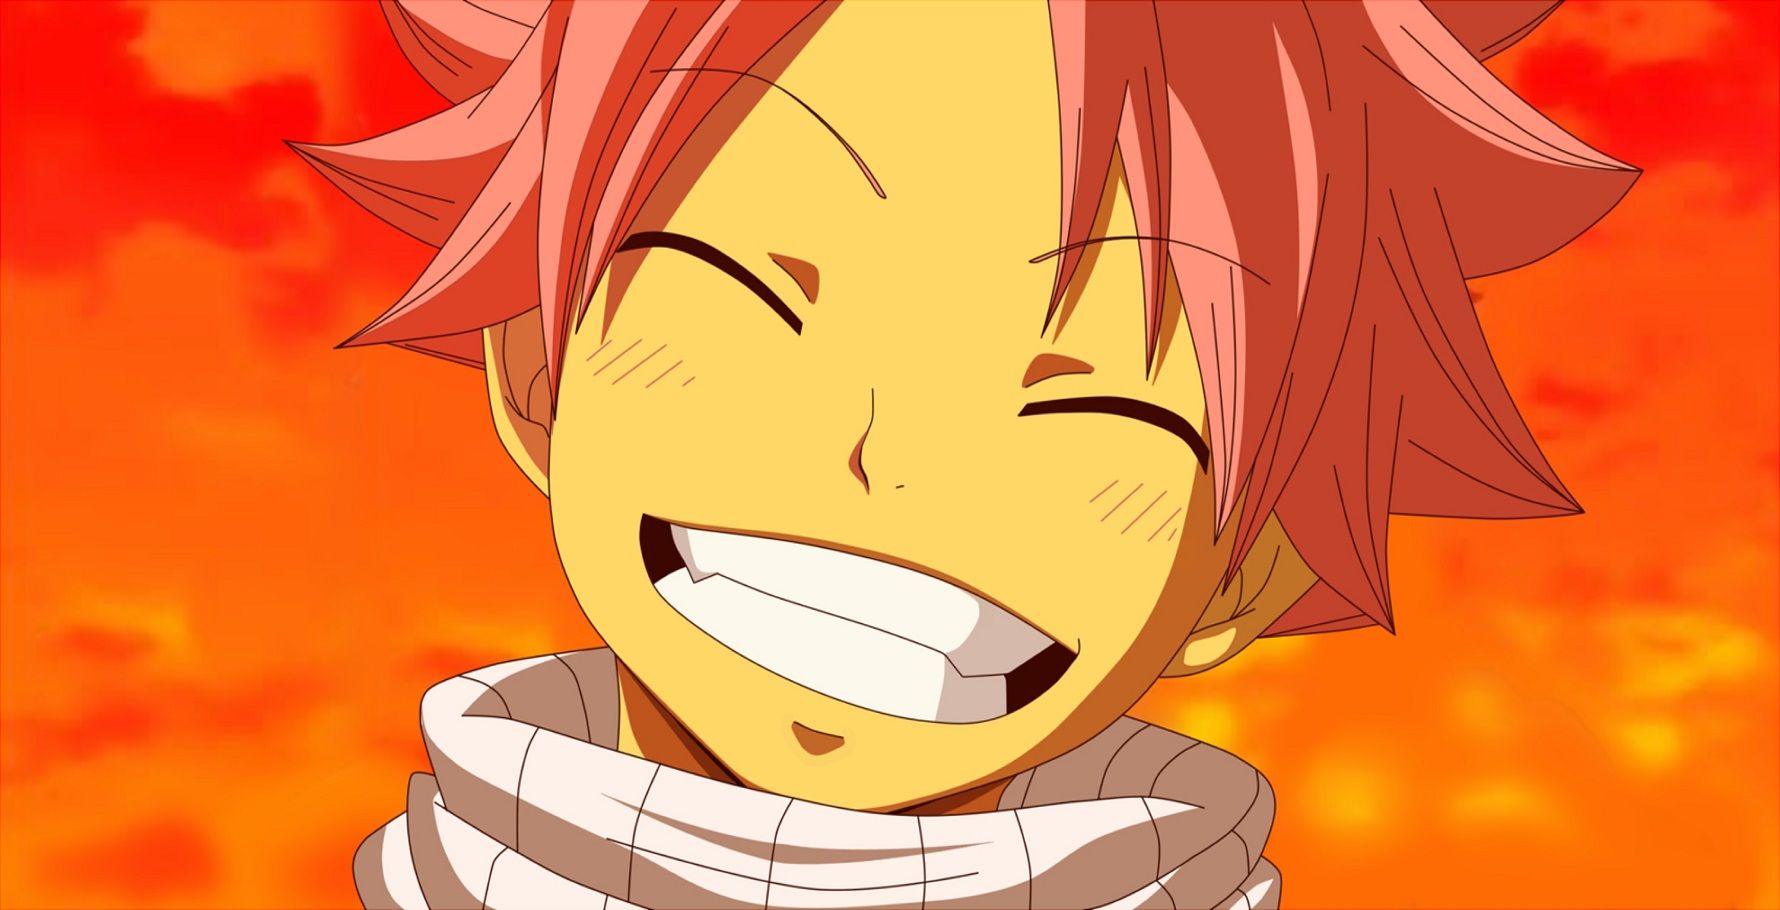 4. Natsu Dragneel from Fairy Tail - wide 11